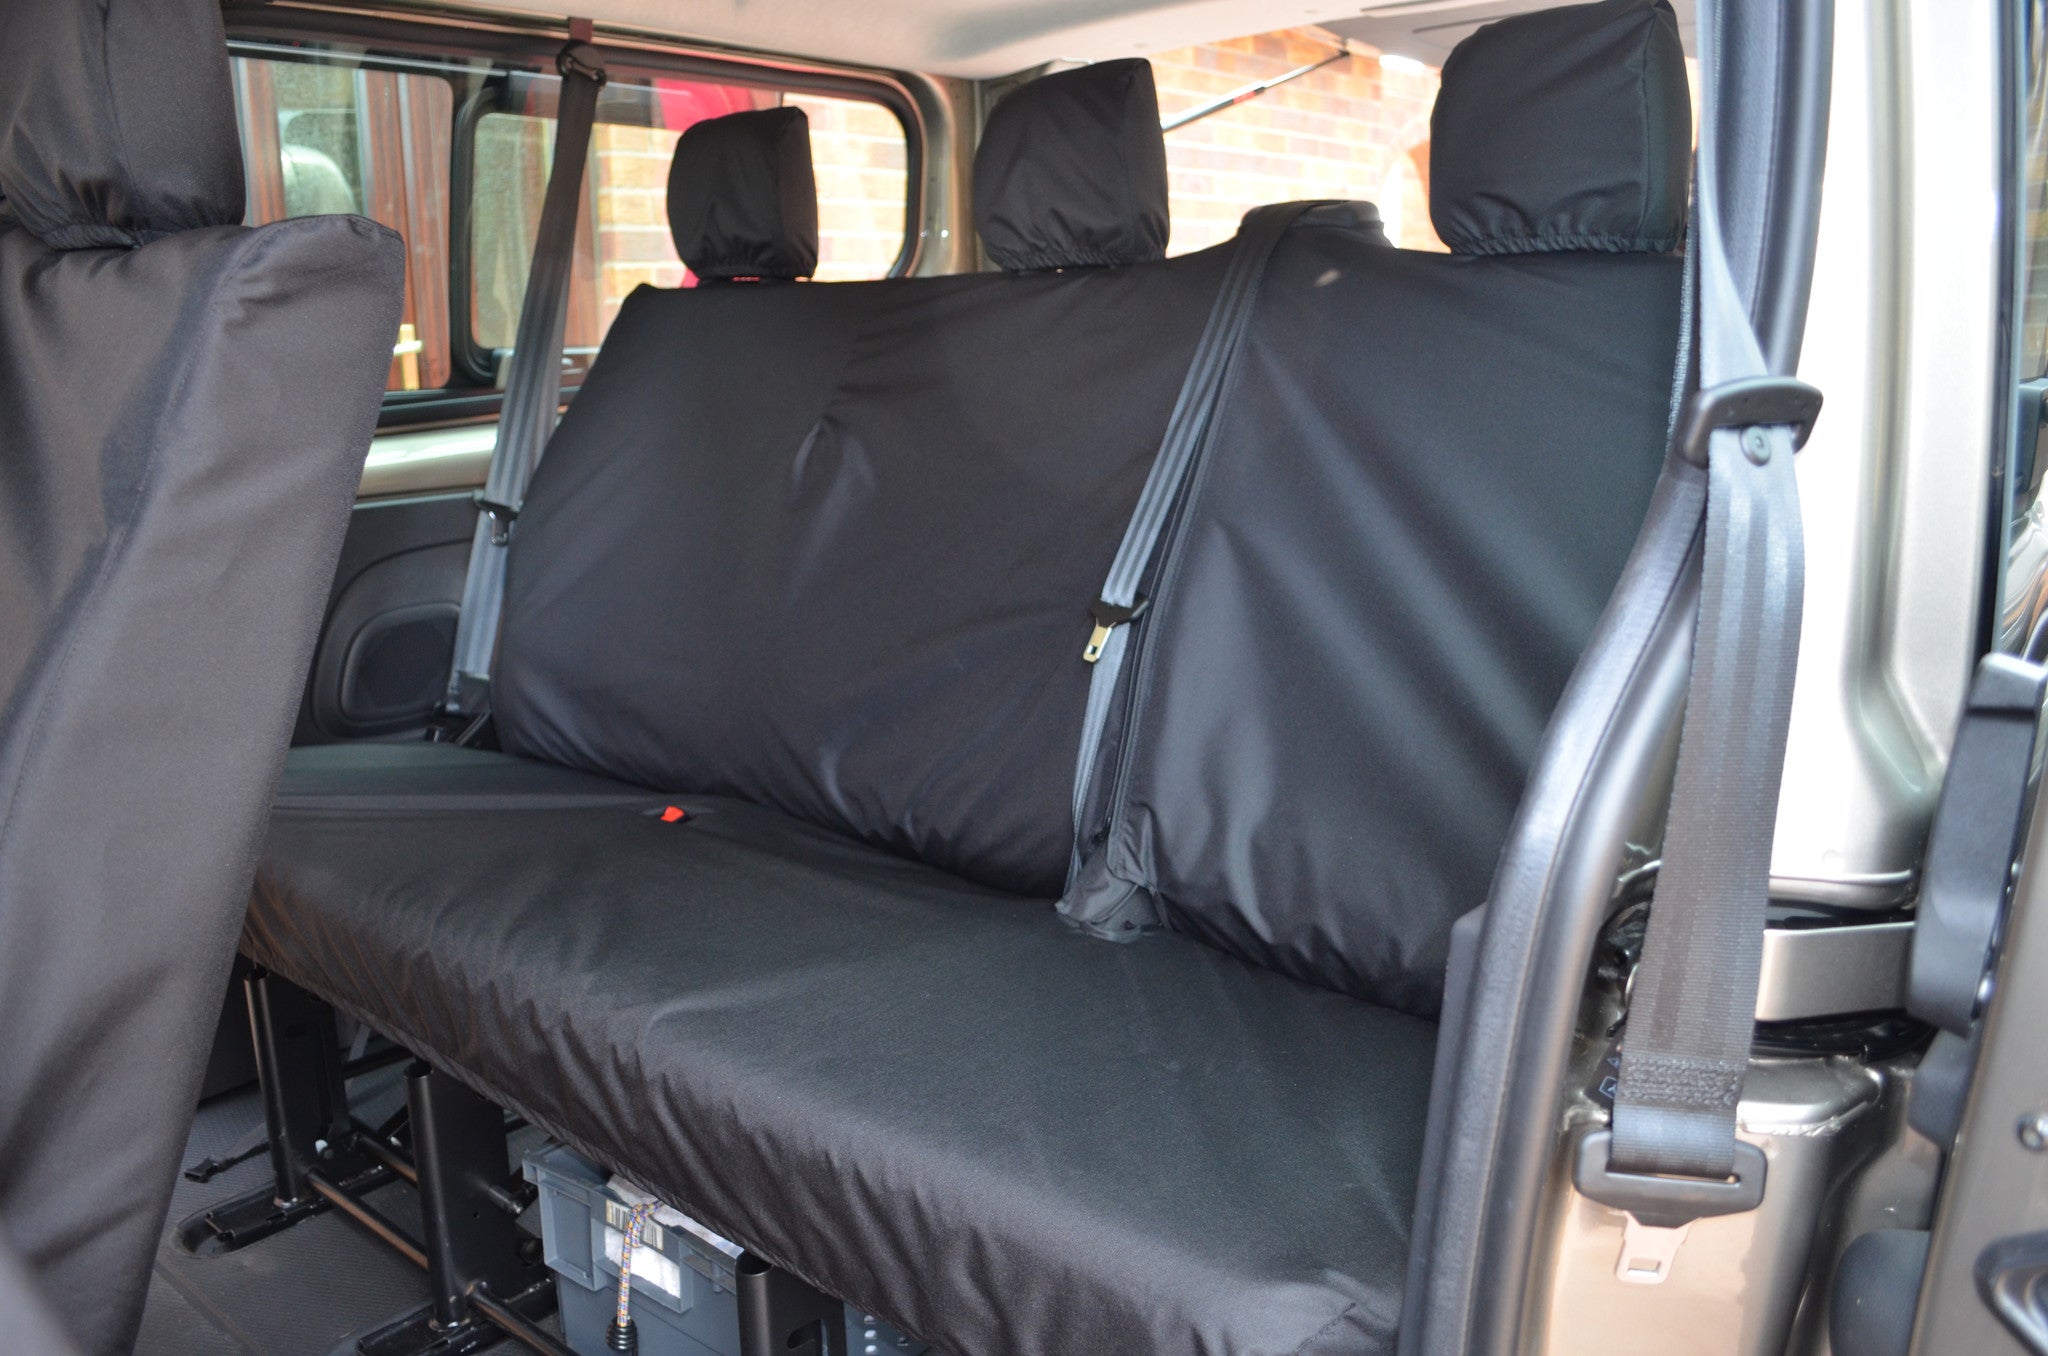 Nissan NV300 2016+ 9-Seater Minibus Seat Covers Black / 3rd Row Rear Turtle Covers Ltd